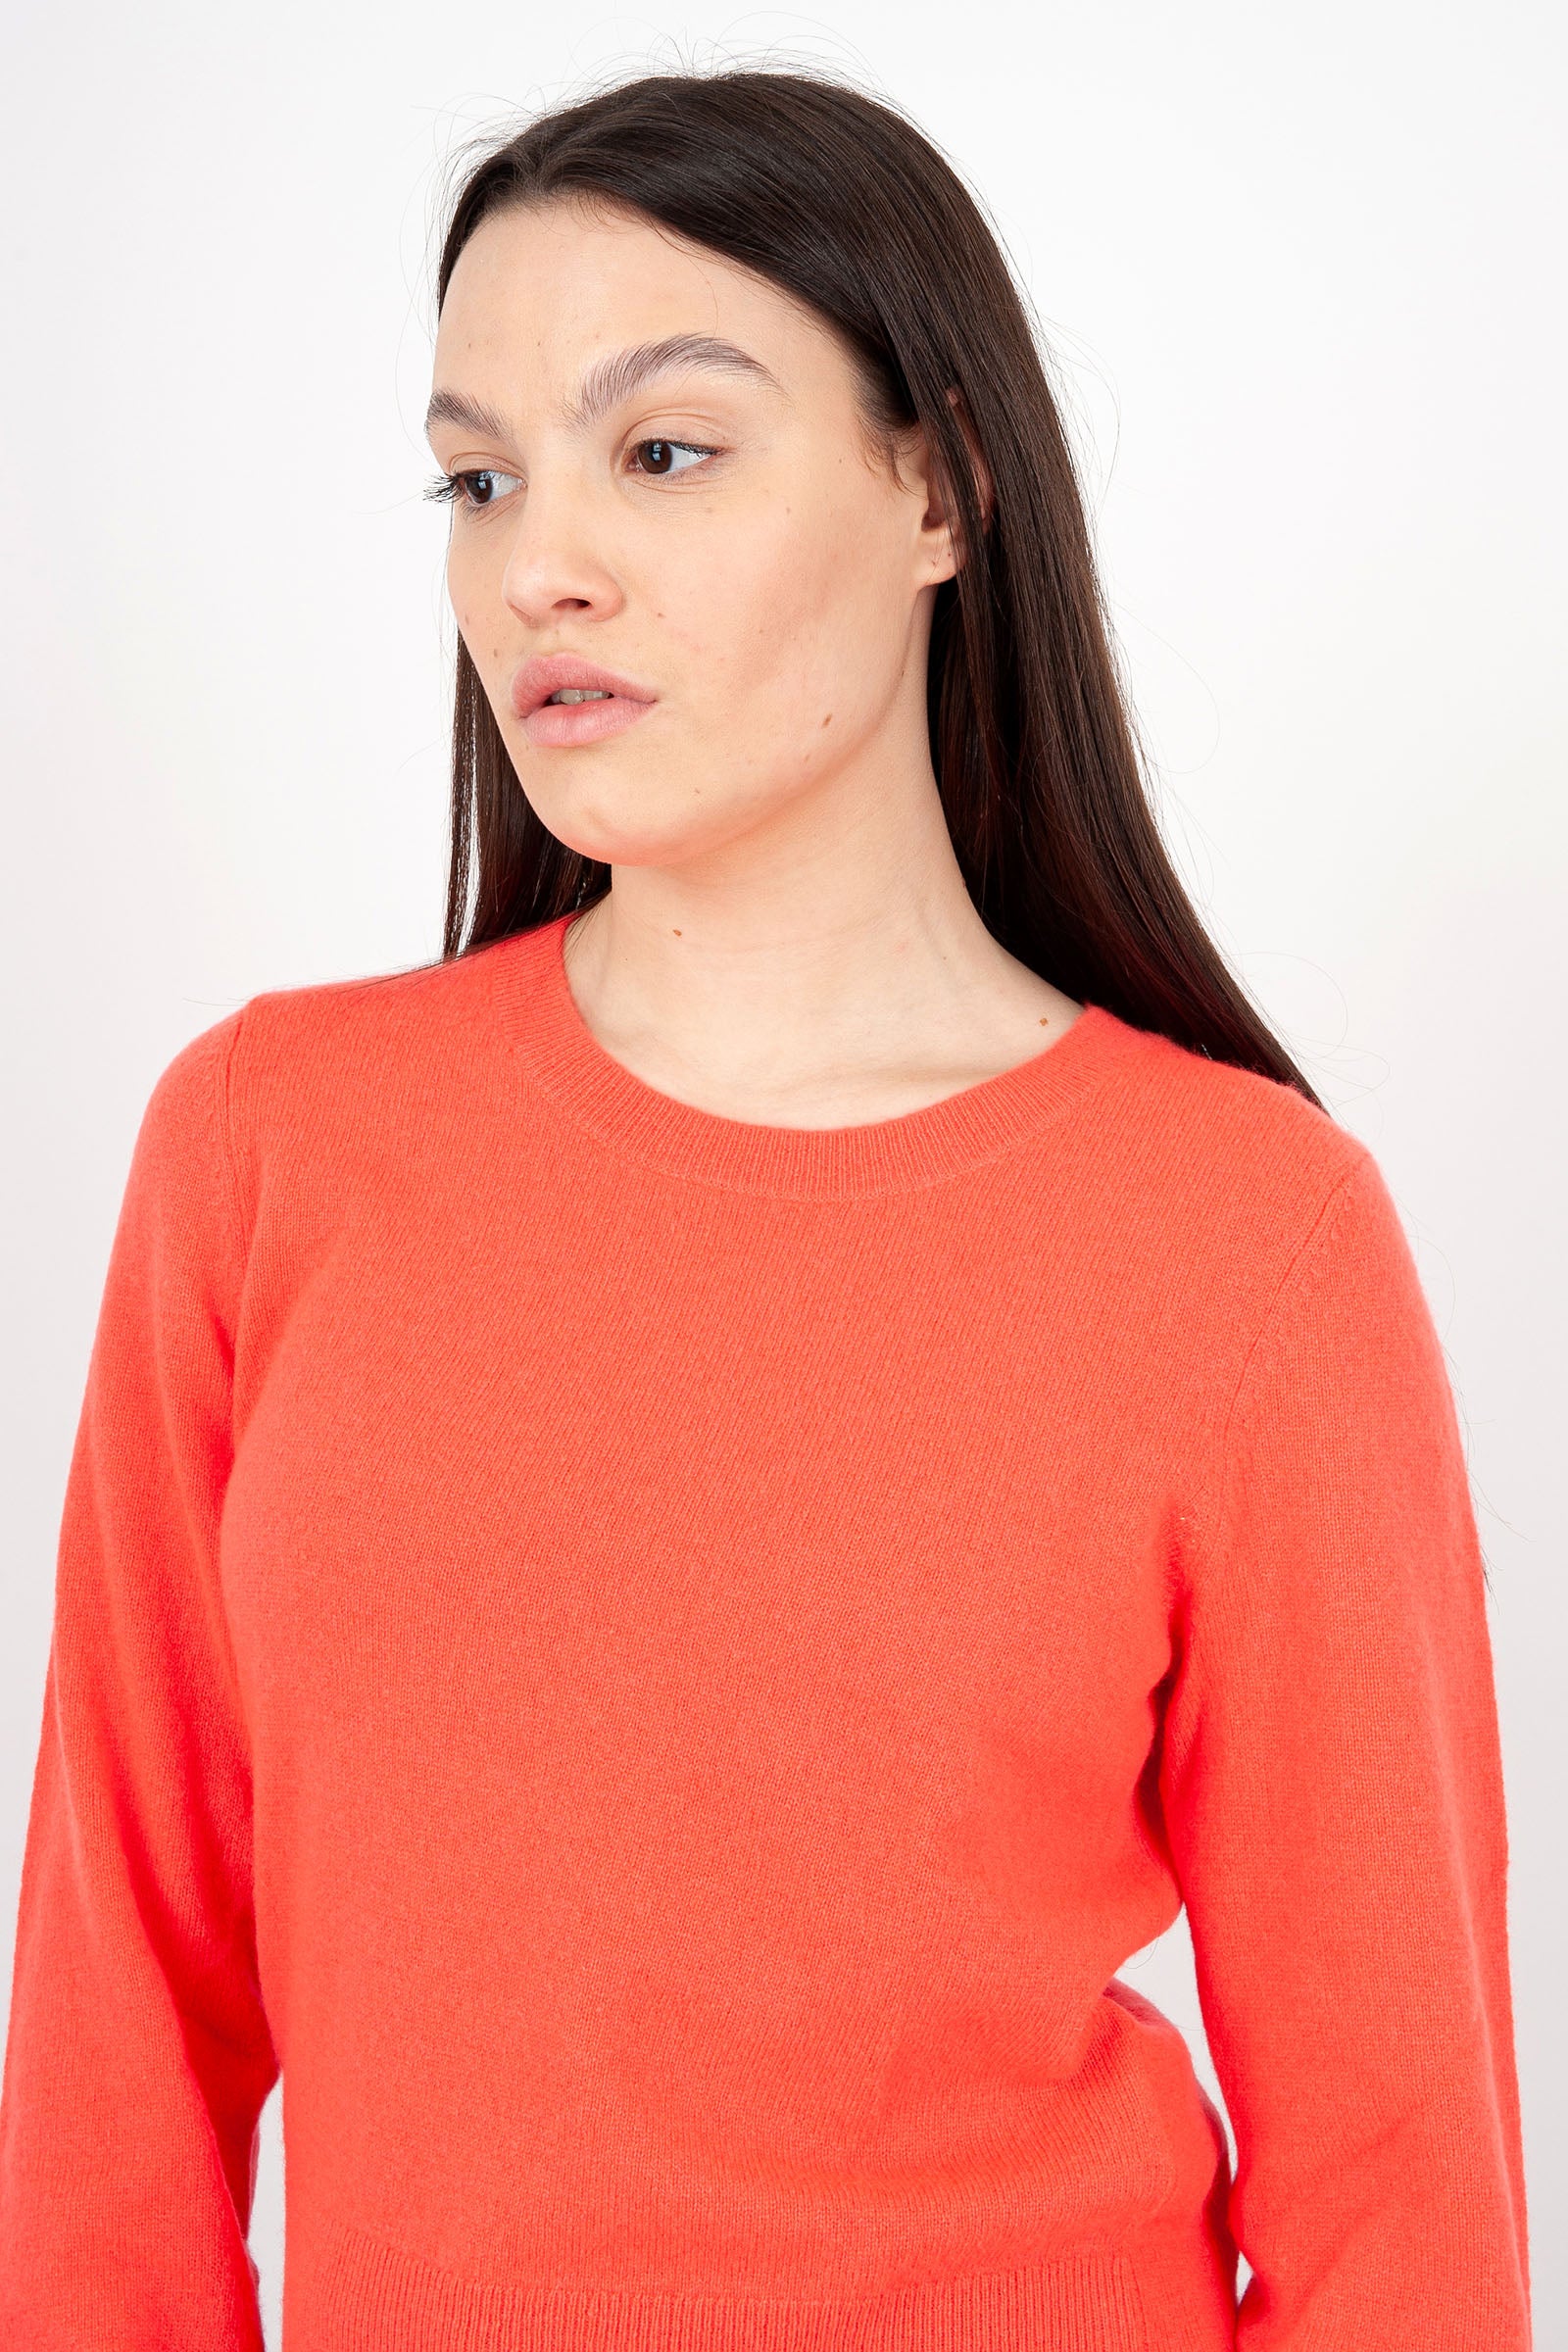 Absolut Cashmere Carlie Crewneck Sweater in Coral Wool - 2